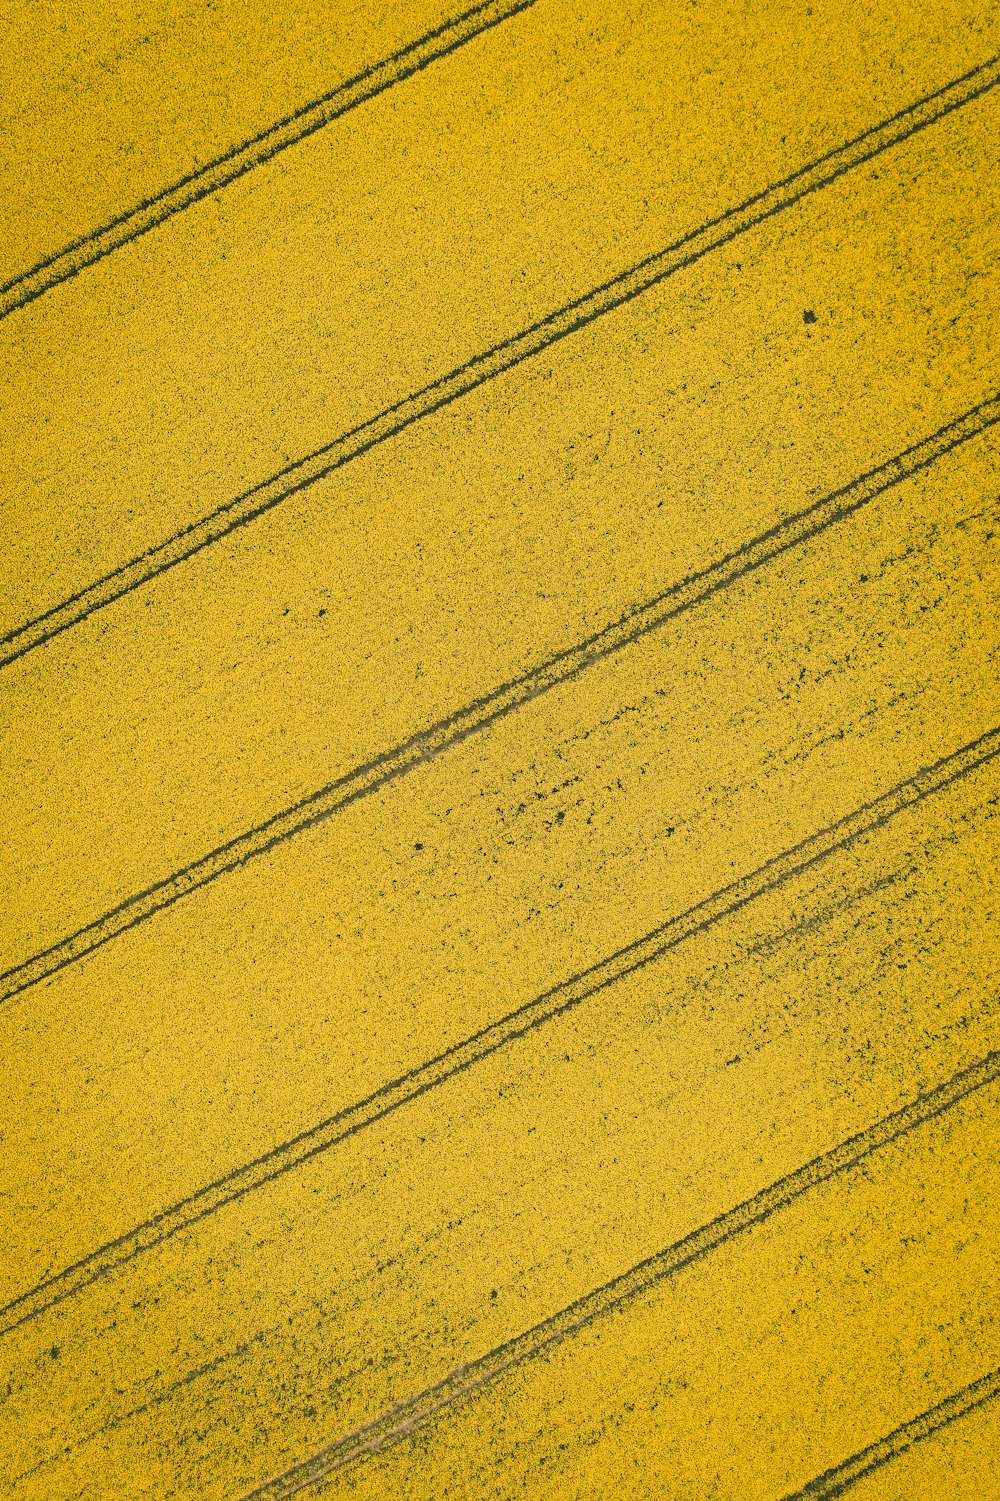 a close up of a yellow surface